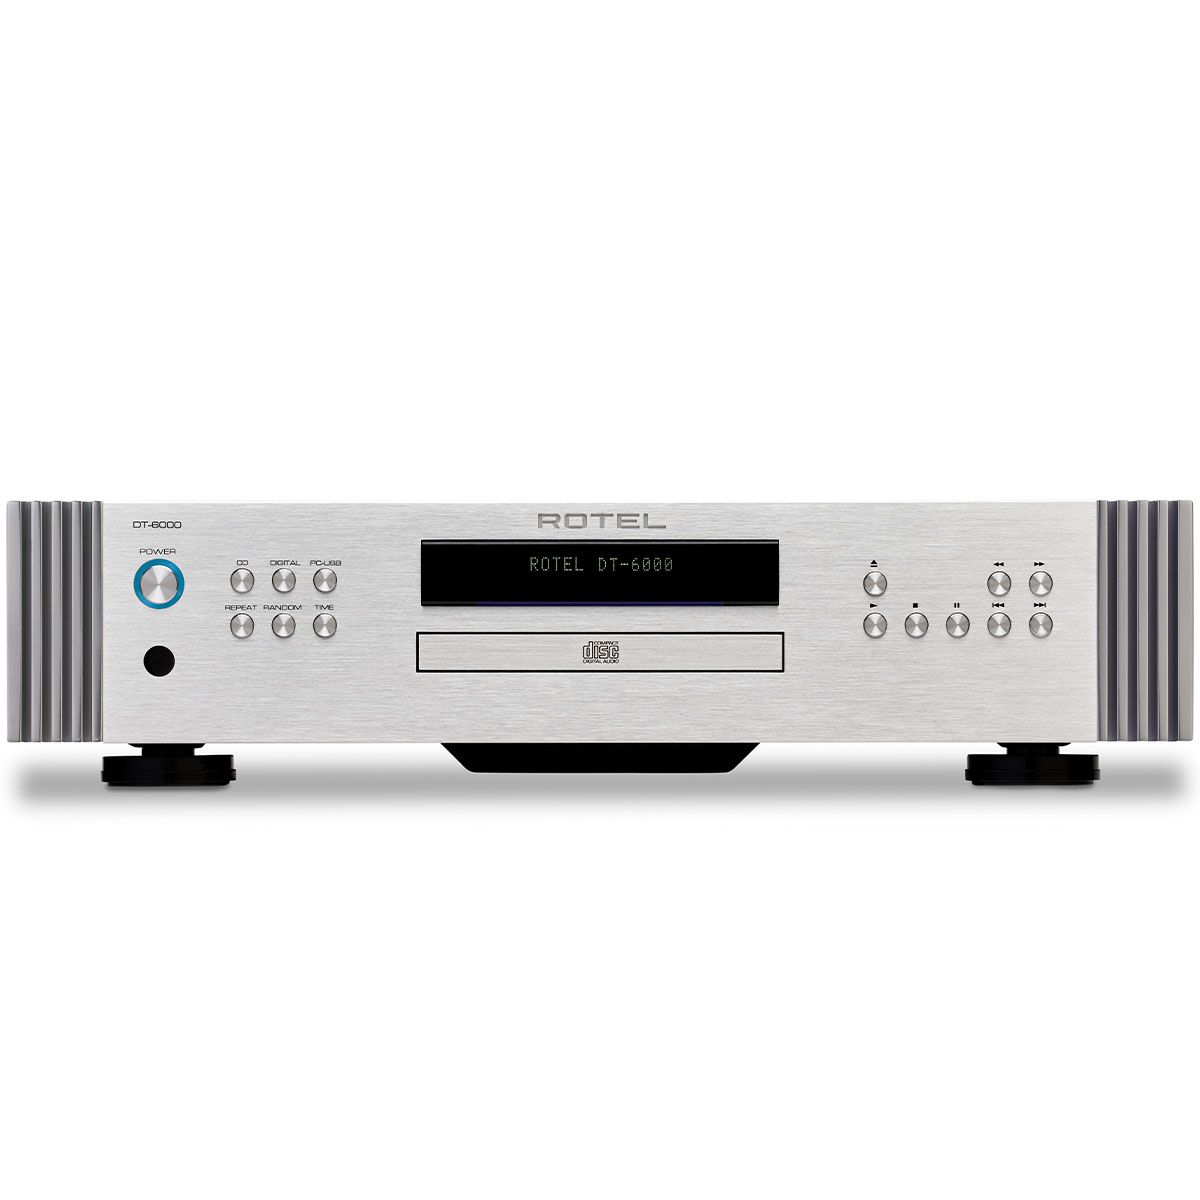 Rotel DT-6000 DAC/CD Transport - Silver - front view